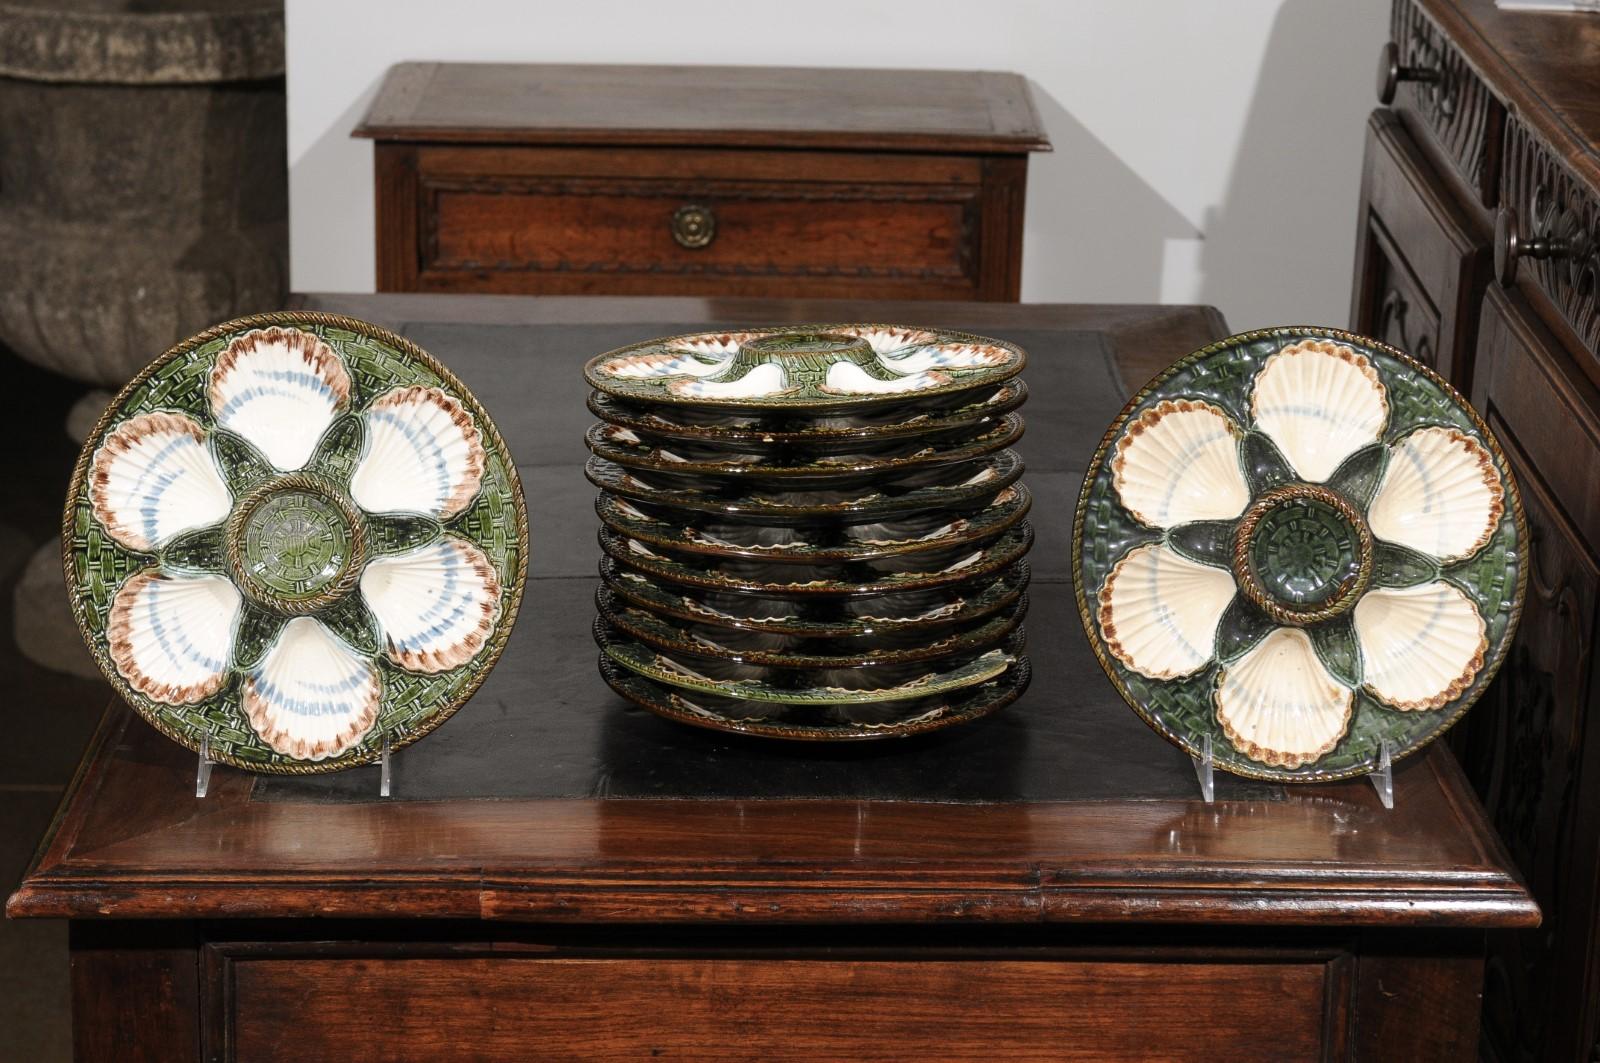 A French majolica Longchamp Terre de Fer scallop plate from the 19th century with green and brown accents. We have 6 plates available, priced and sold individually. Born in France during the 19th century, this scallop plate presents a green, white